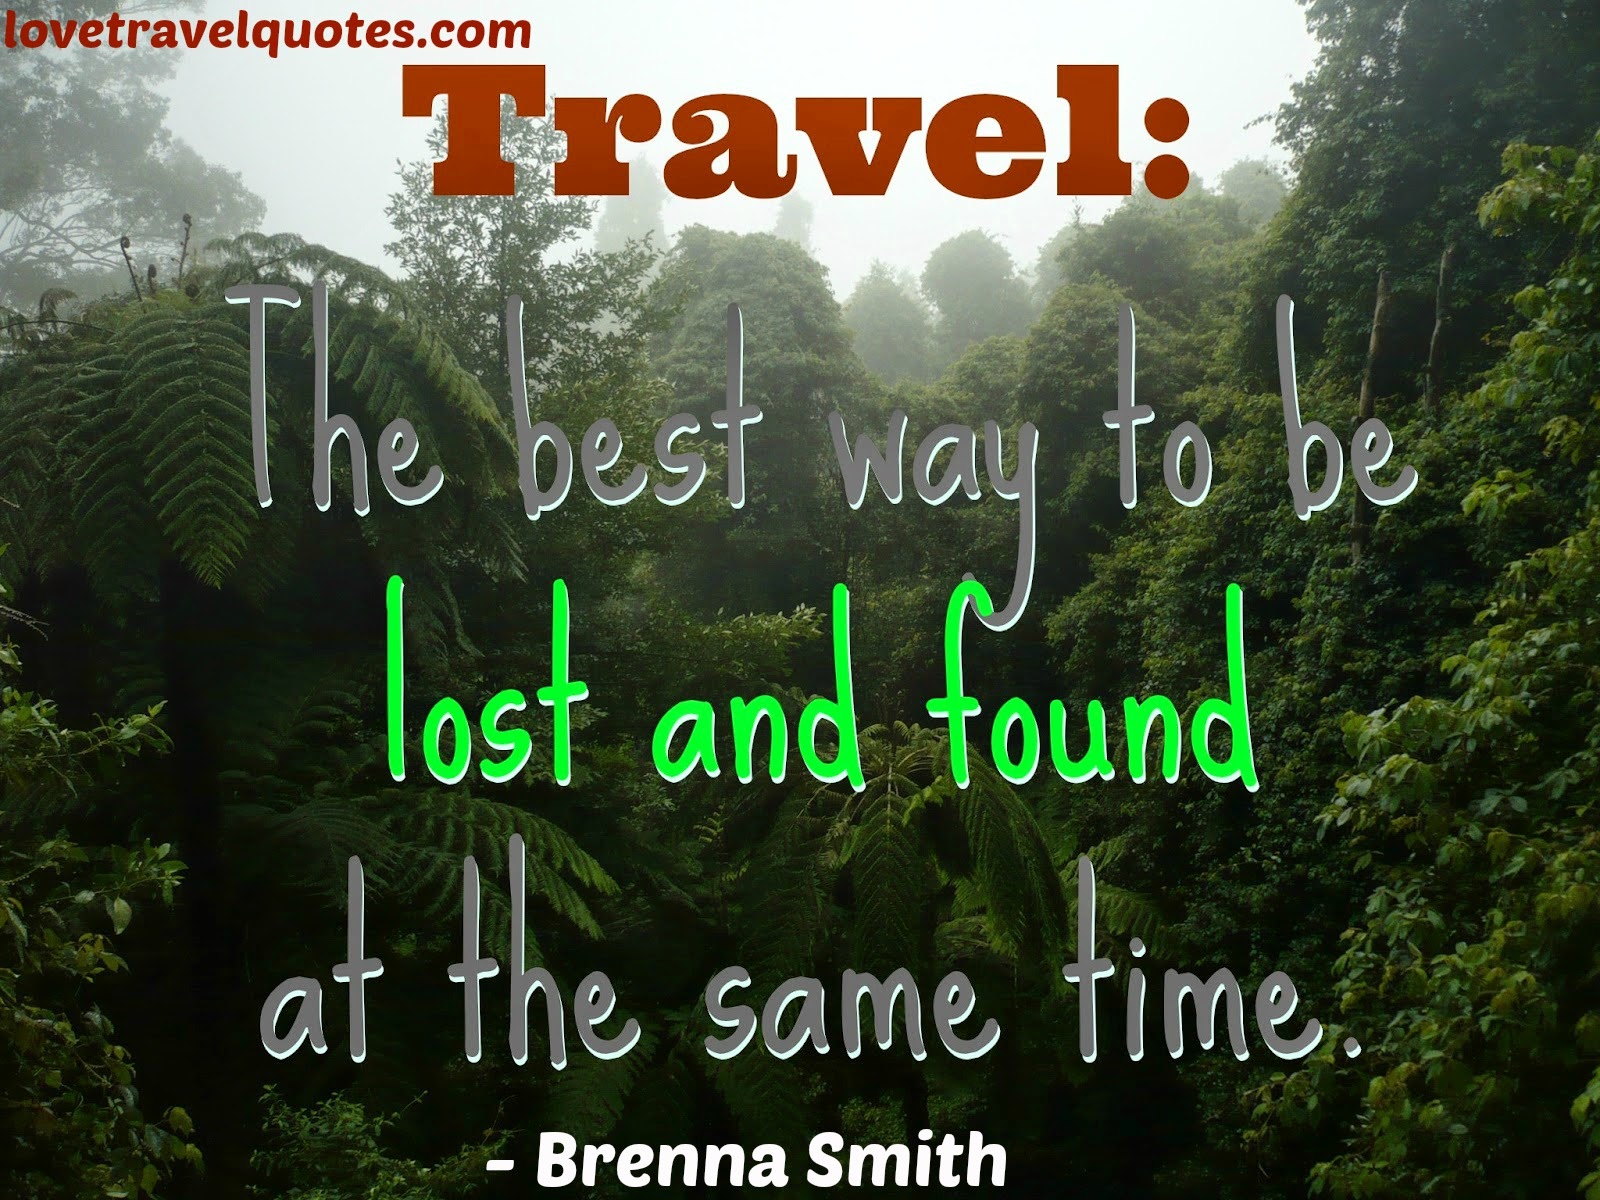 Travel: The best way to be lost and found at the same time